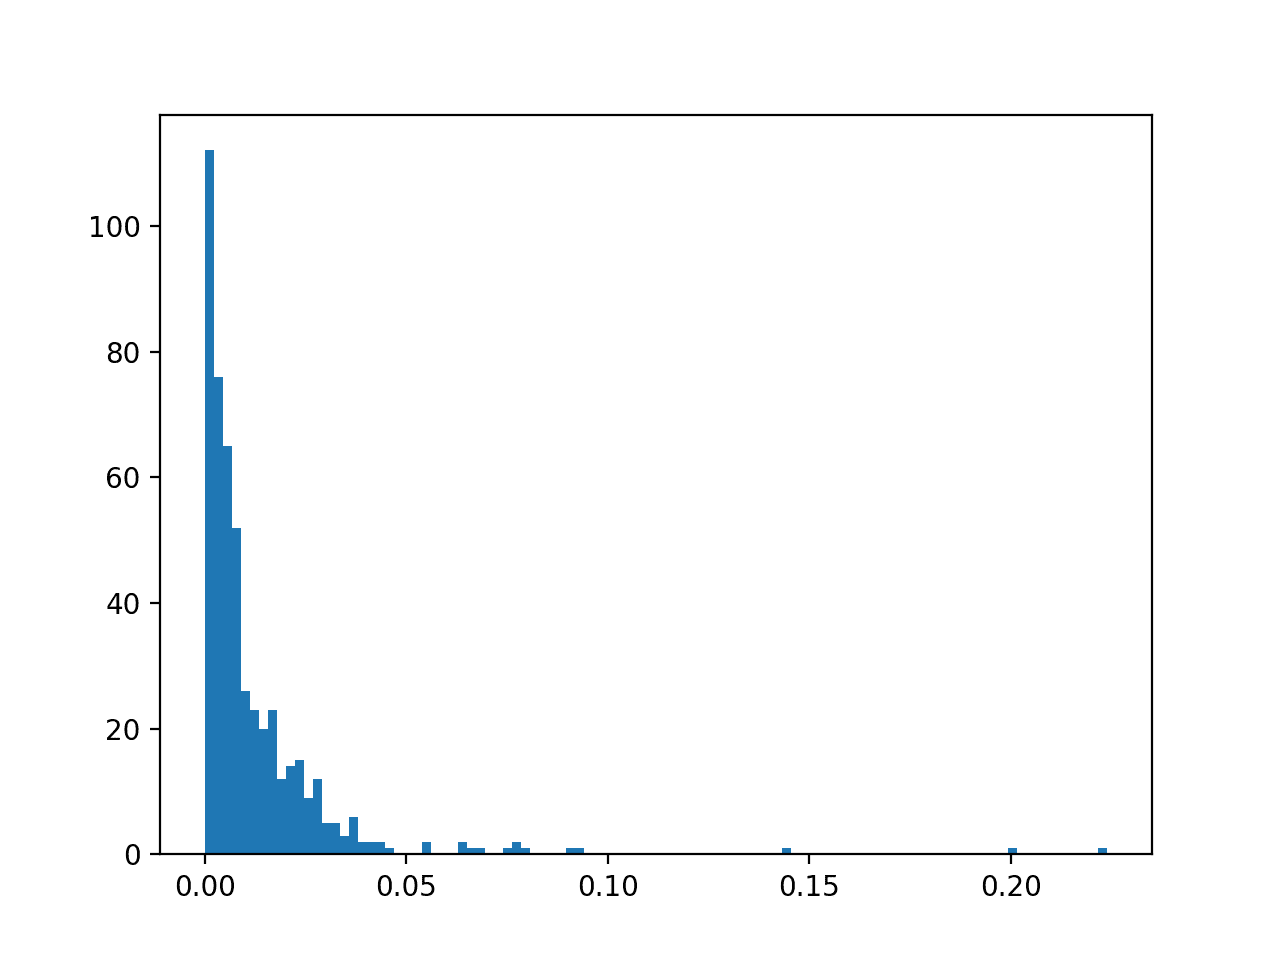 Histogram of Logistic Regression Predicted Probabilities for Class 1 for Imbalanced Classification